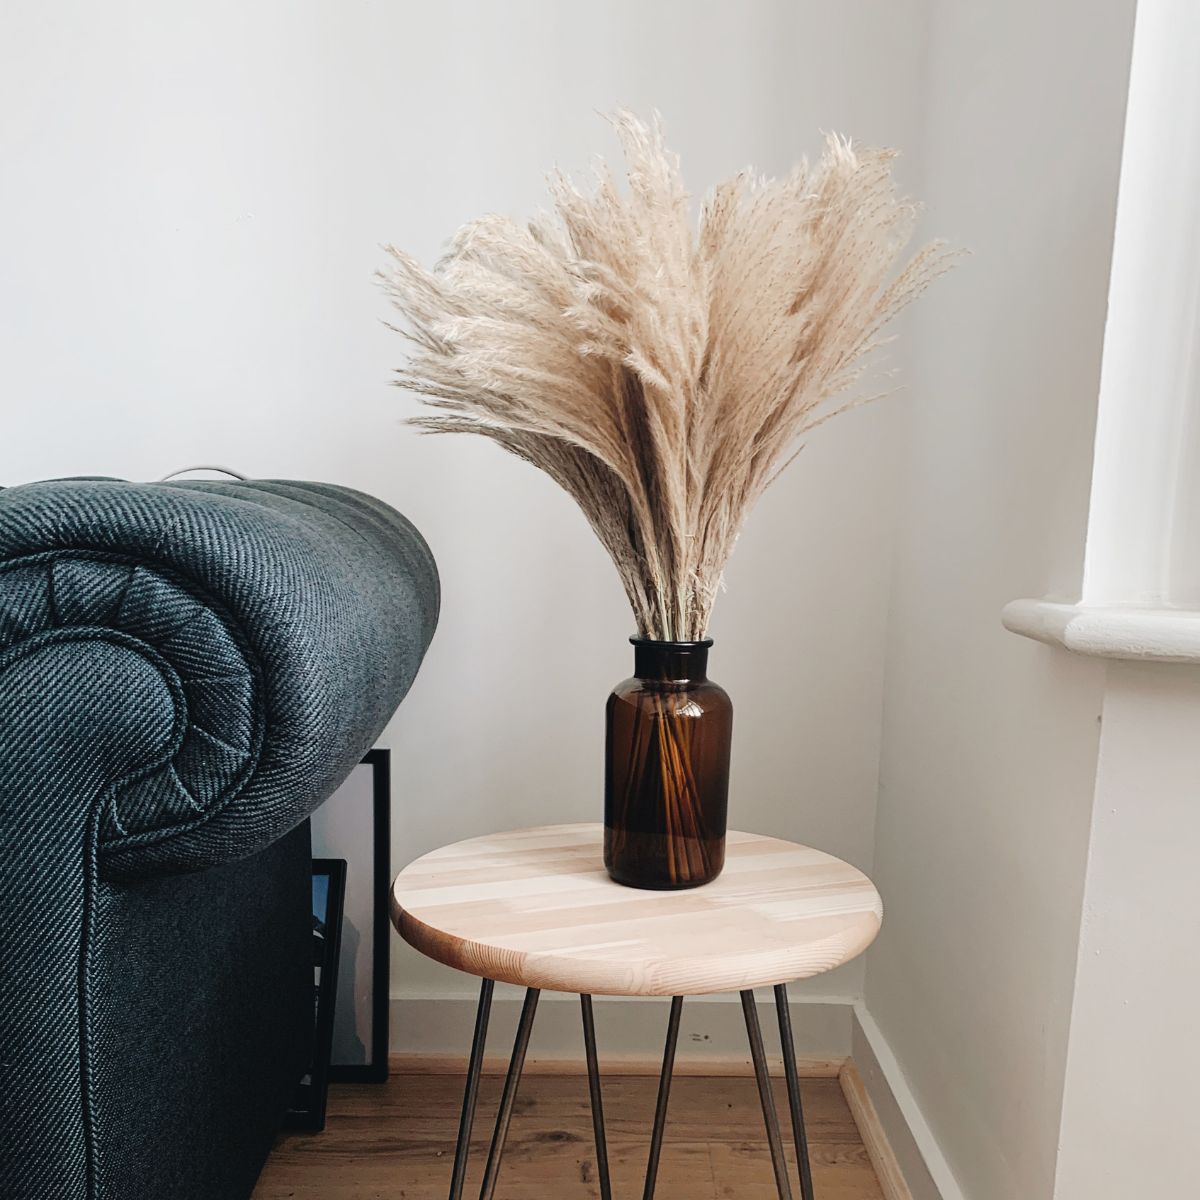 7-ways-pampas-grass-will-create-a-jaw-dropping-home-decoration-featured